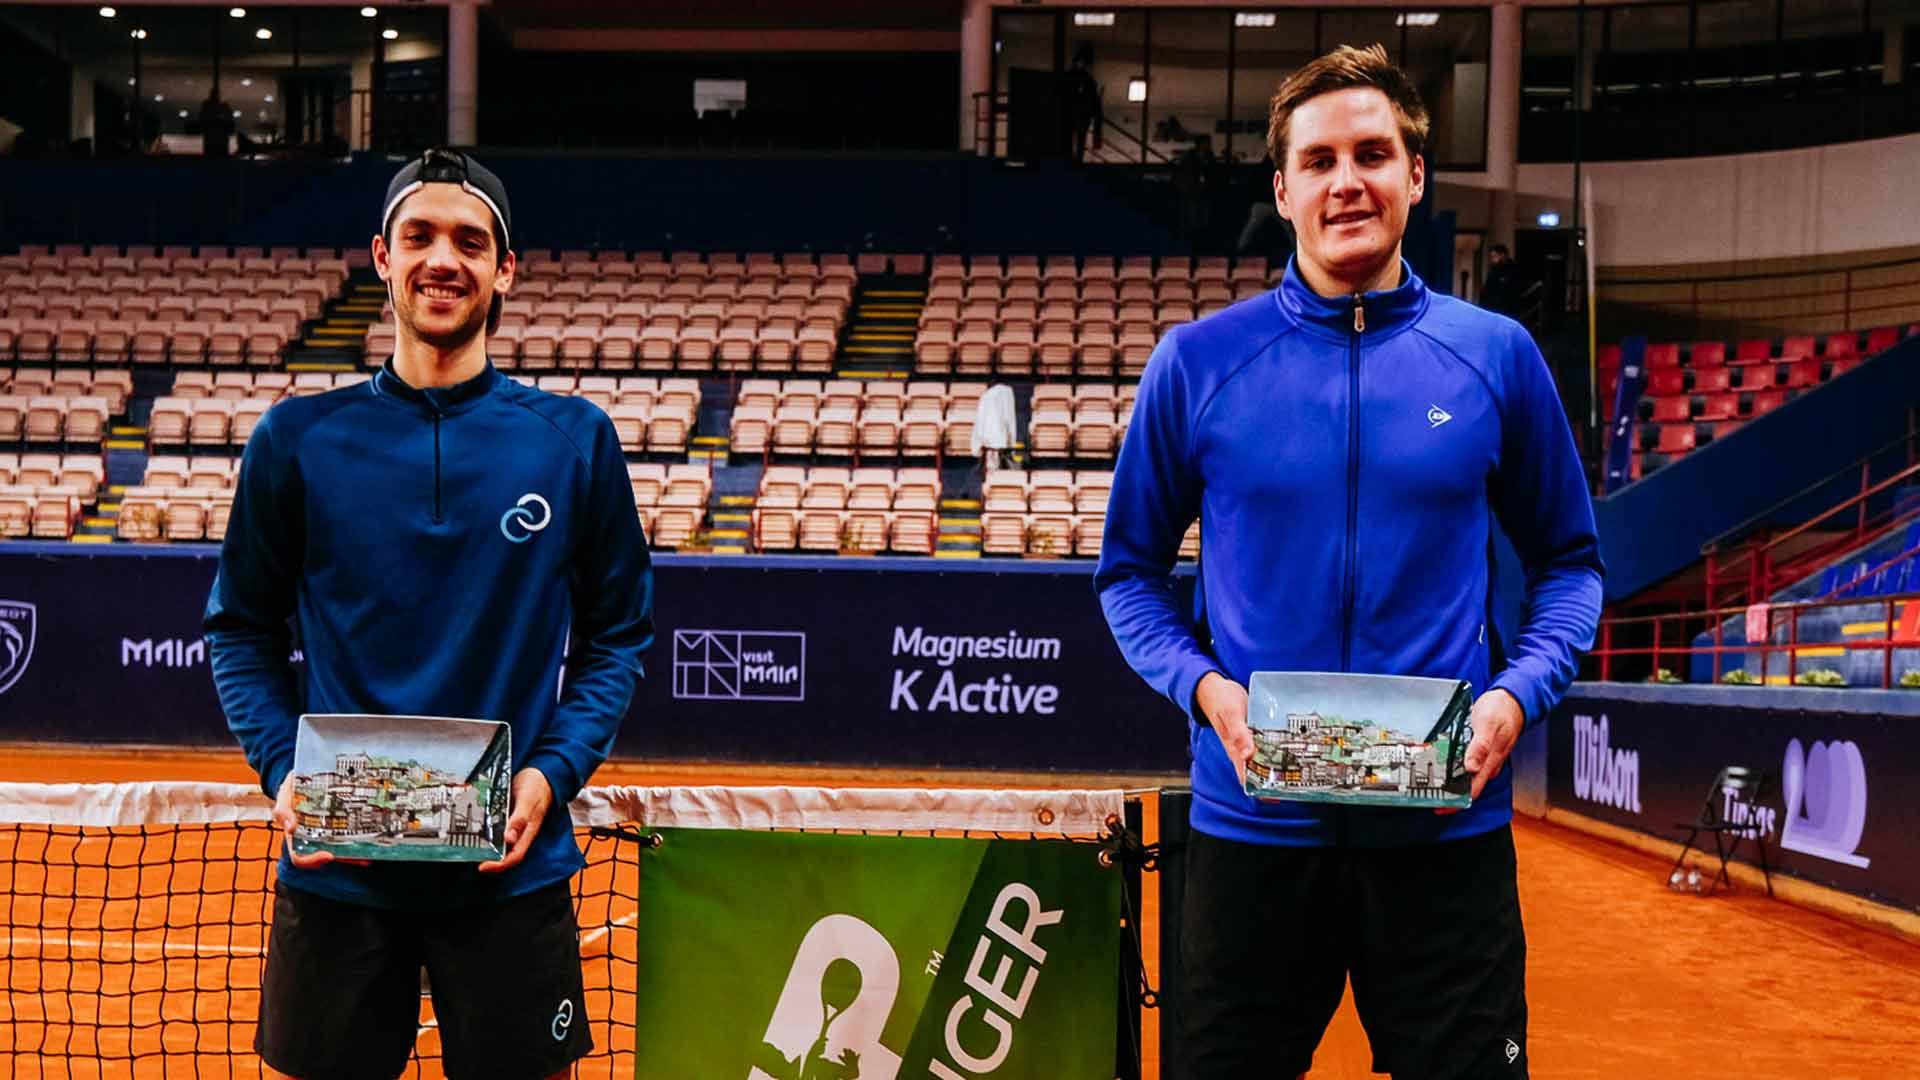 <a href='https://www.atptour.com/en/players/julian-cash/ci96/overview'>Julian Cash</a> (left) and <a href='https://www.atptour.com/en/players/henry-patten/p0g6/overview'>Henry Patten</a> are crowned champions at the Maia Challenger.